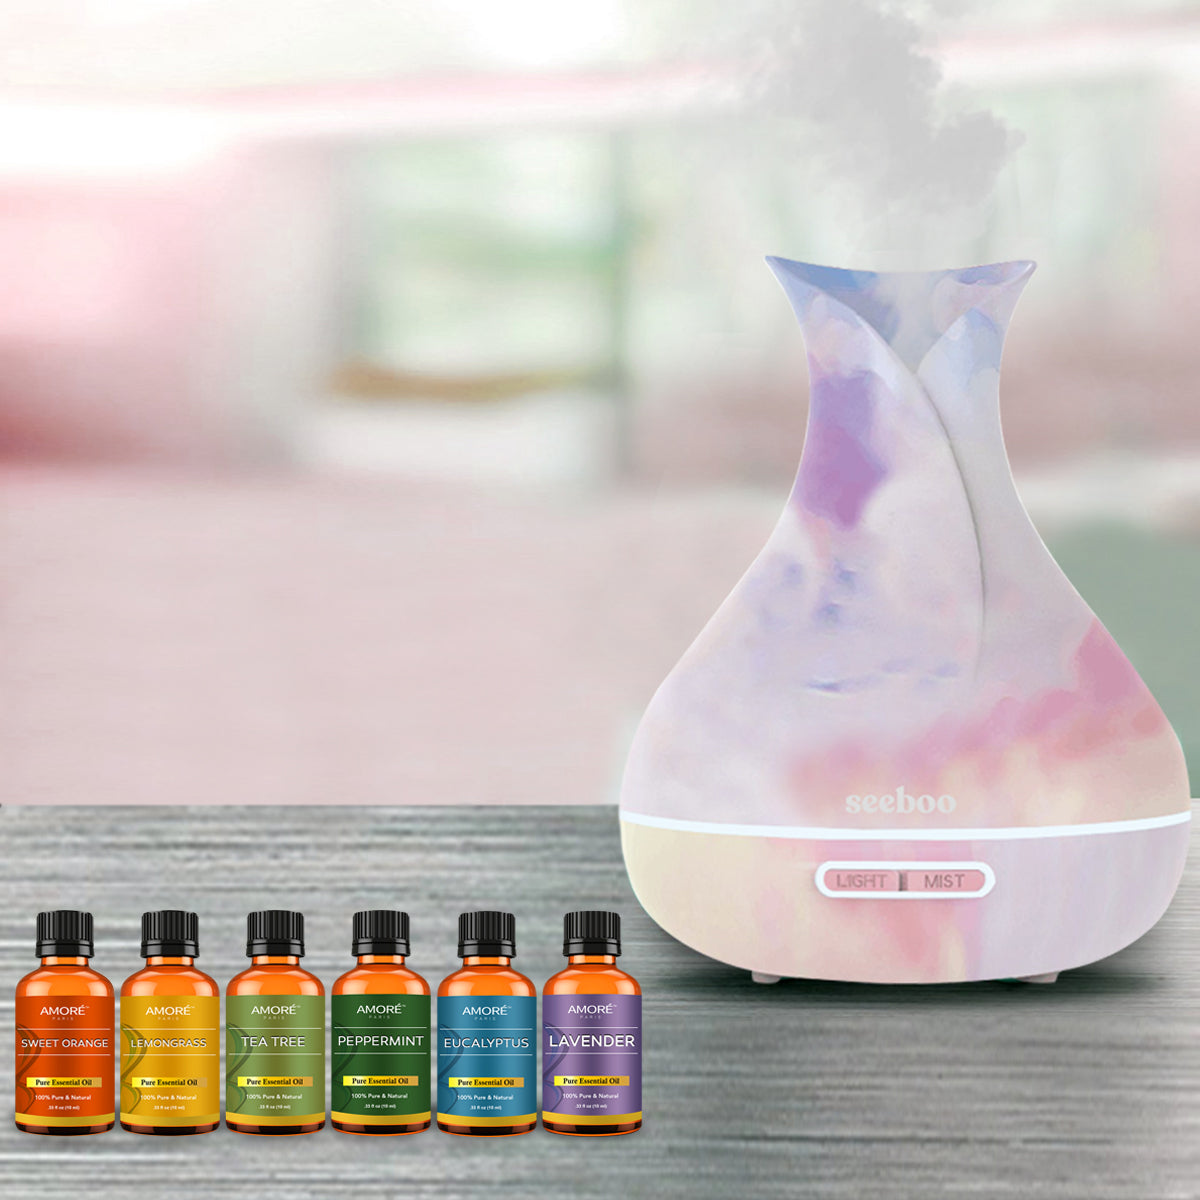 AMORÉ x SEEBOO Tie Dyed Unique Diffuser Humidifier With Essential Oil Gift Set (7-Piece)